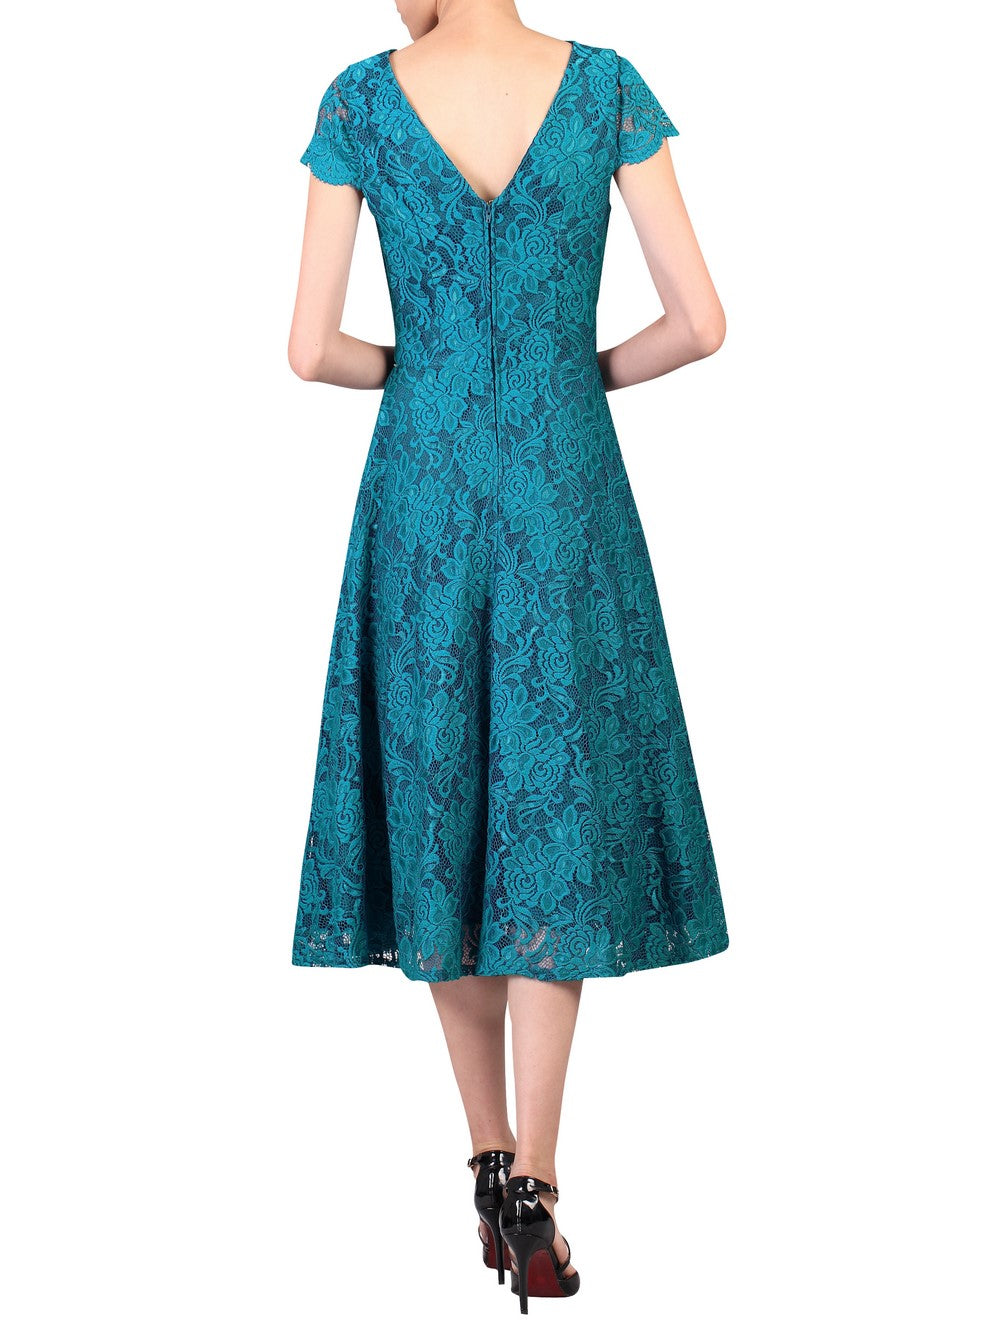 Jolie Moi Teal Lace Embroidered Cap Sleeve Swing Dress - Pretty Kitty Fashion